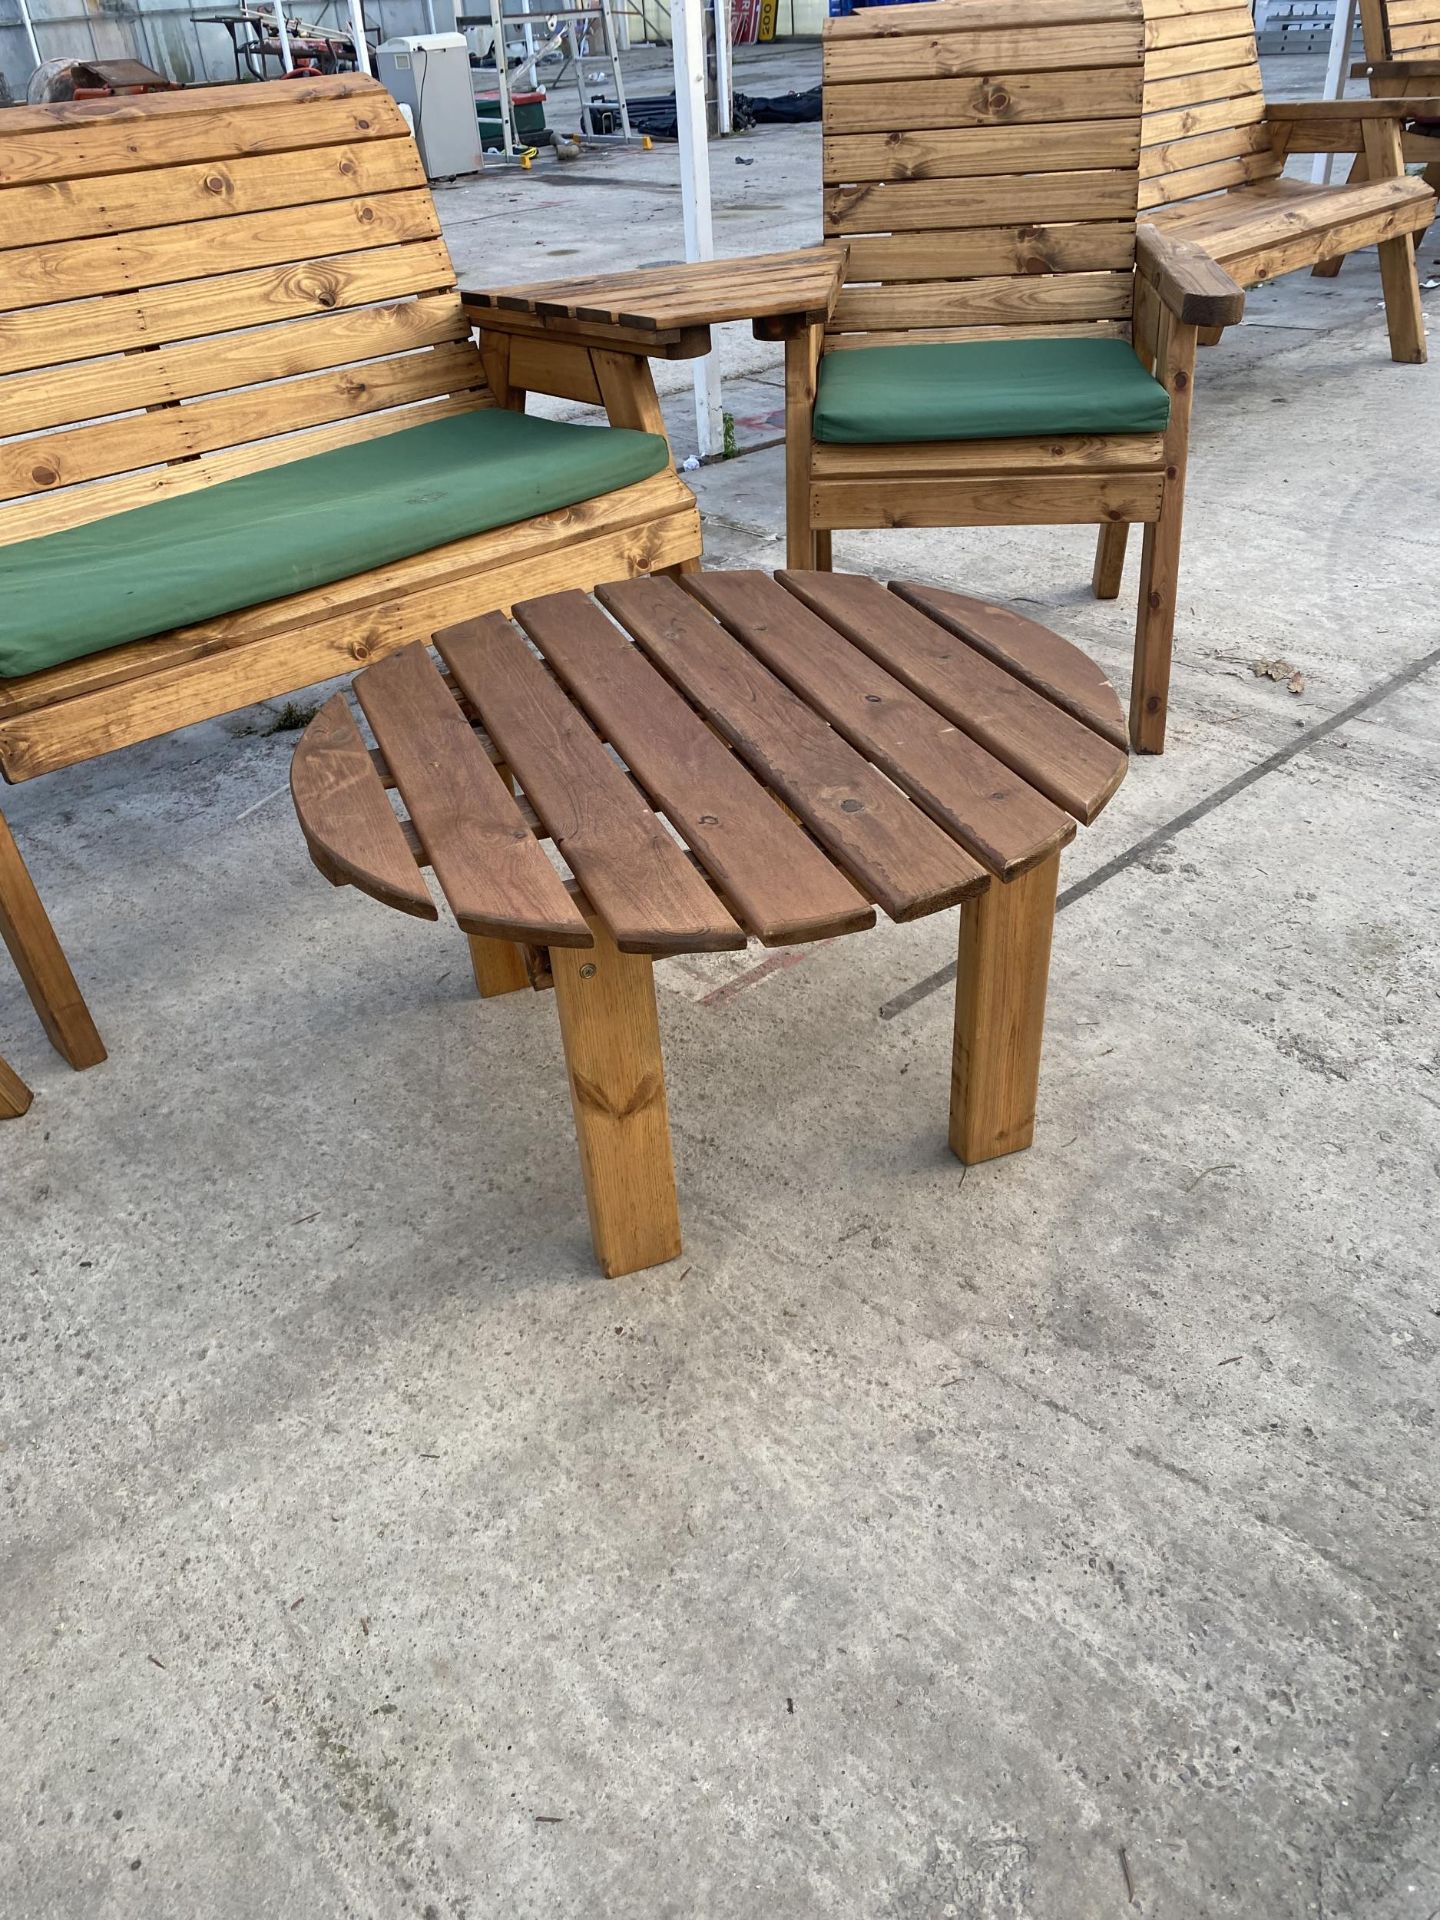 AN AS NEW EX DISPLAY CHARLES TAYLOR PATIO SET COMPRISING OF A BENCH, TWO CHAIRS, A ROUND COFFEE - Image 4 of 5